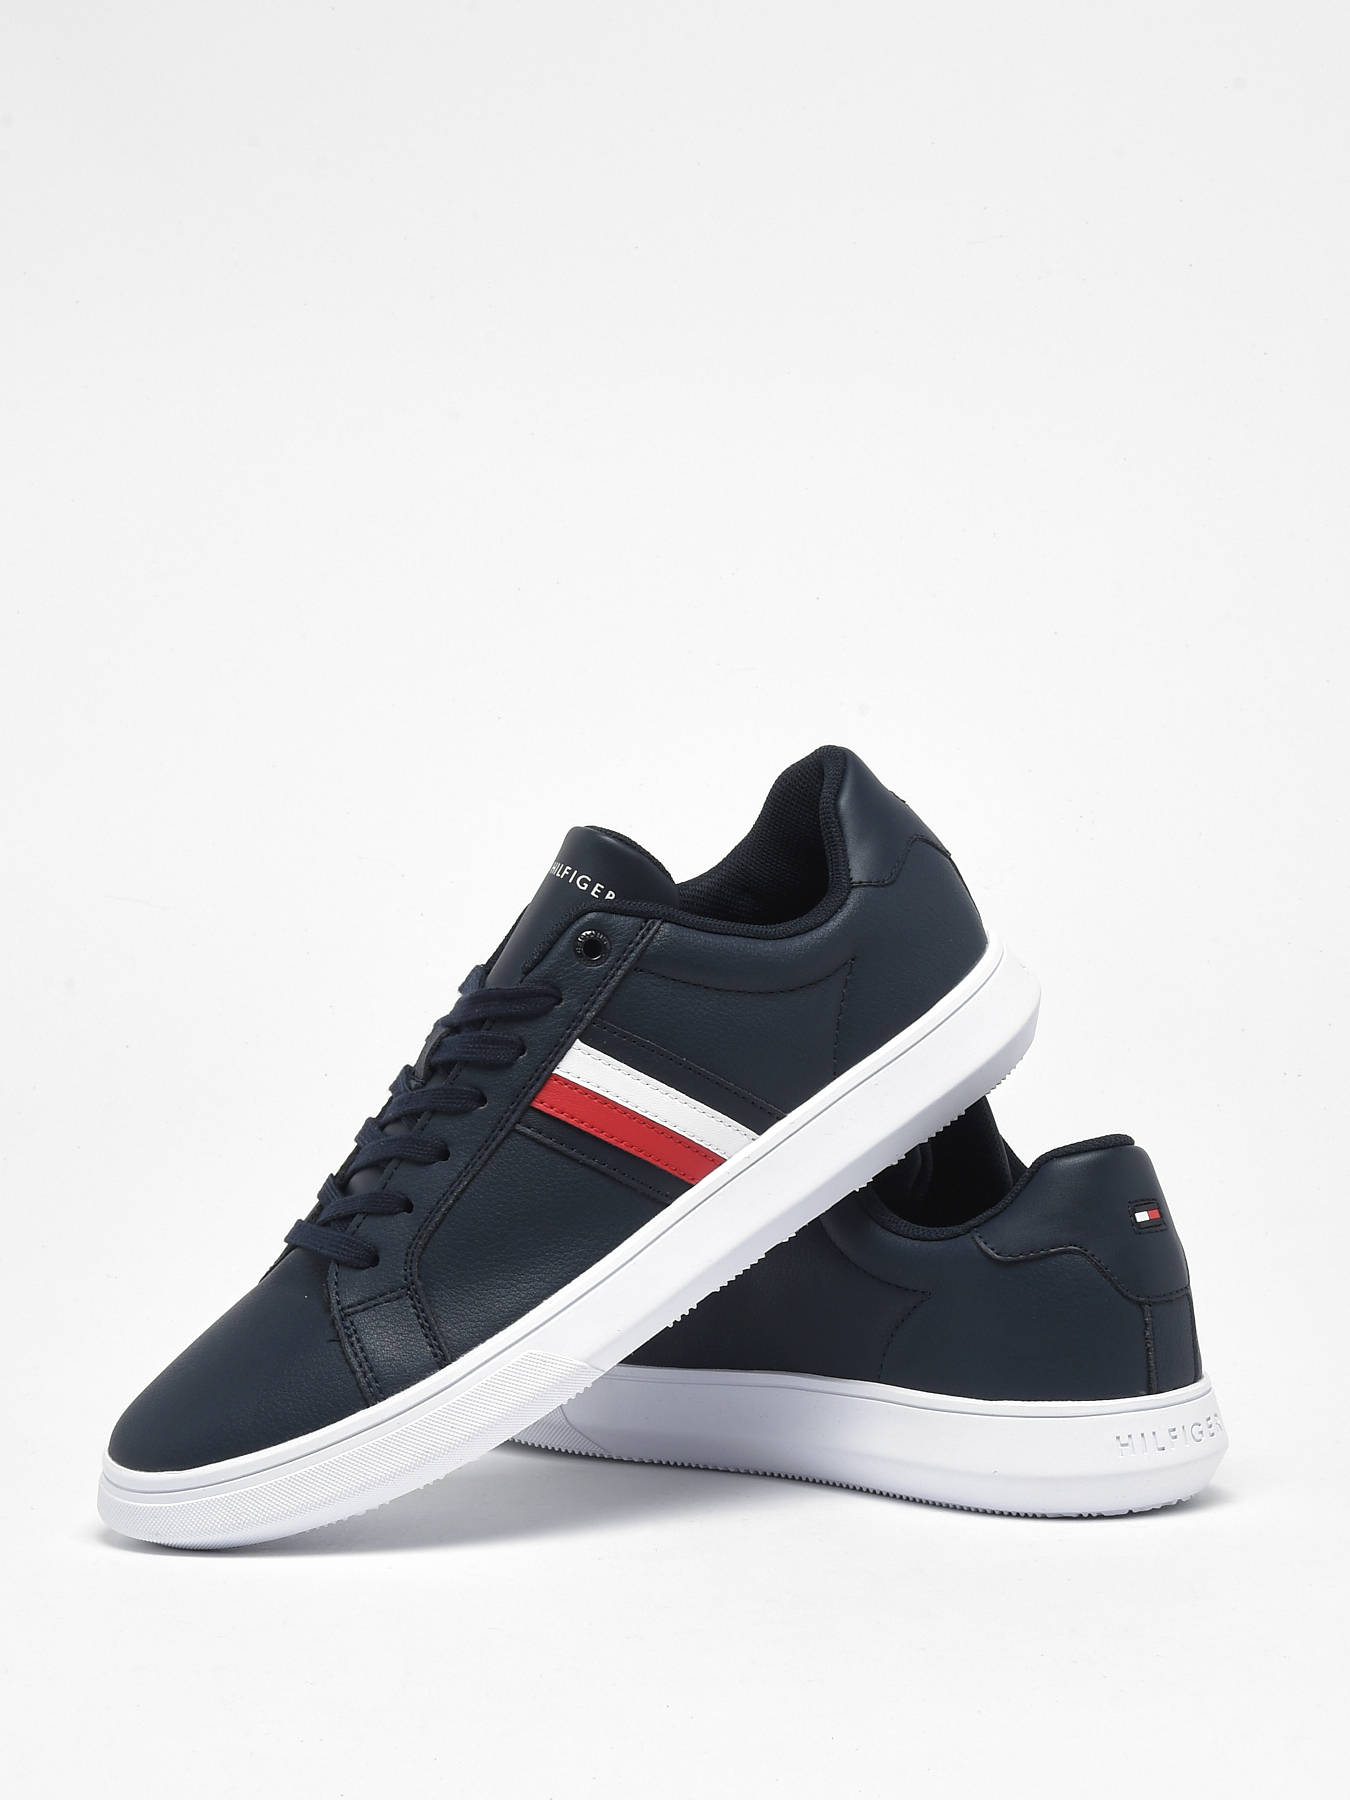 Tommy Hilfiger For him from 50 to 100 euros CORPORATE CUP LEATHE - best